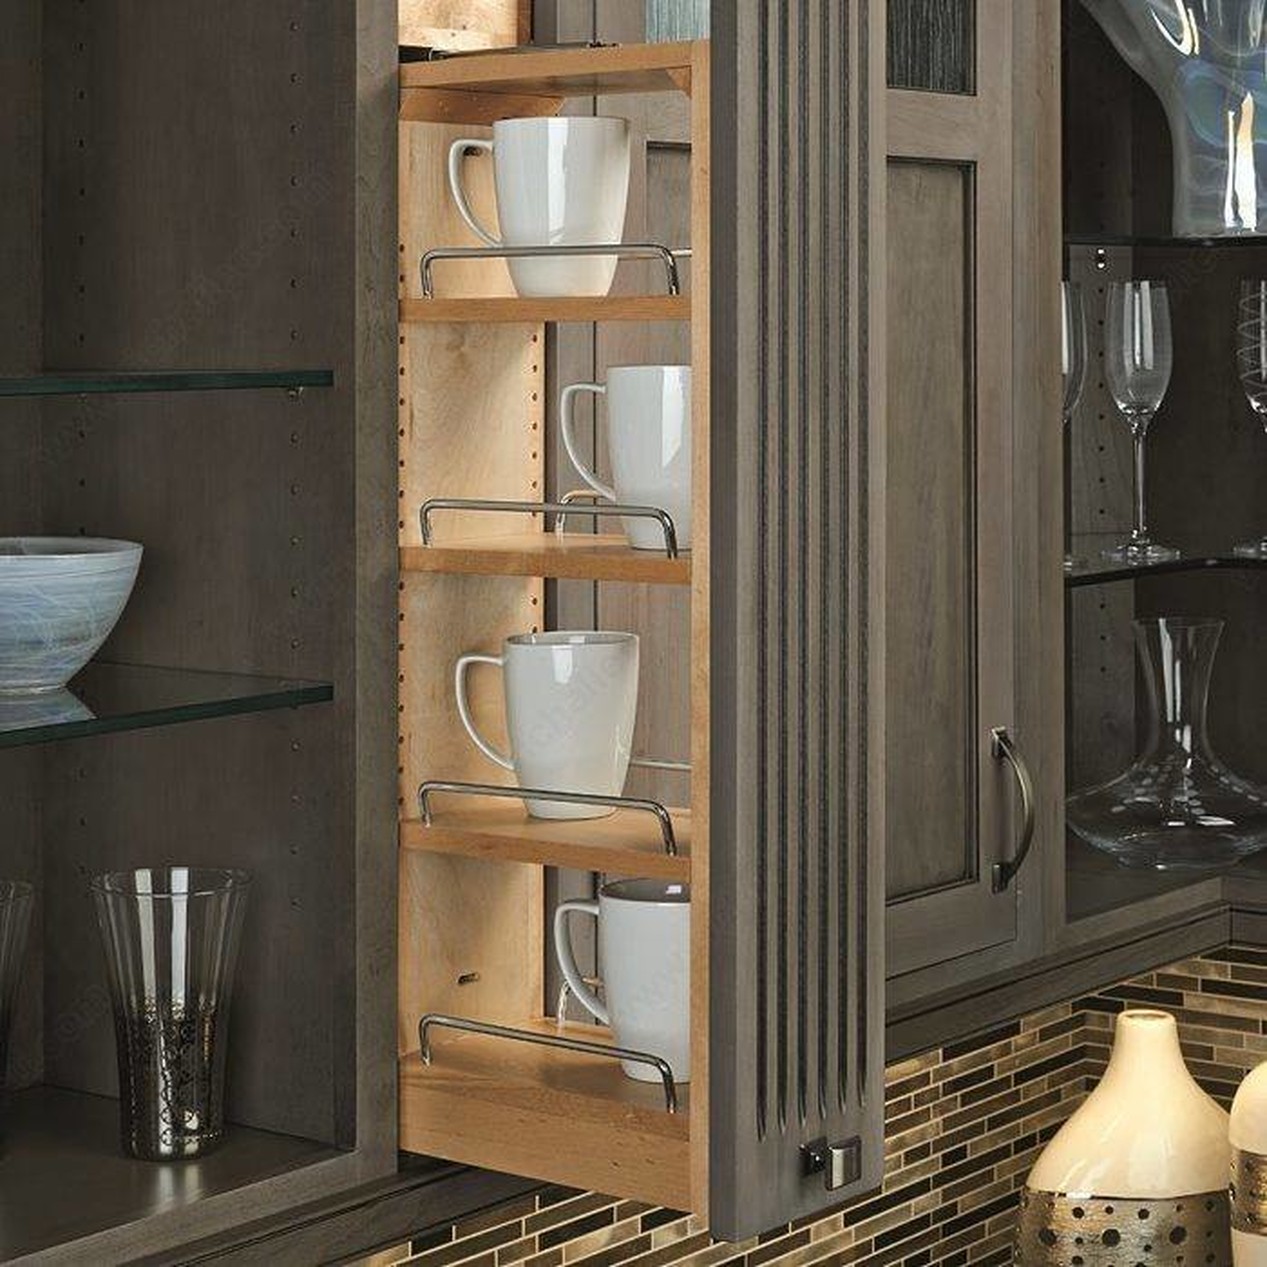 Easily find EVERYTHING in your cabinets with custom pullouts!